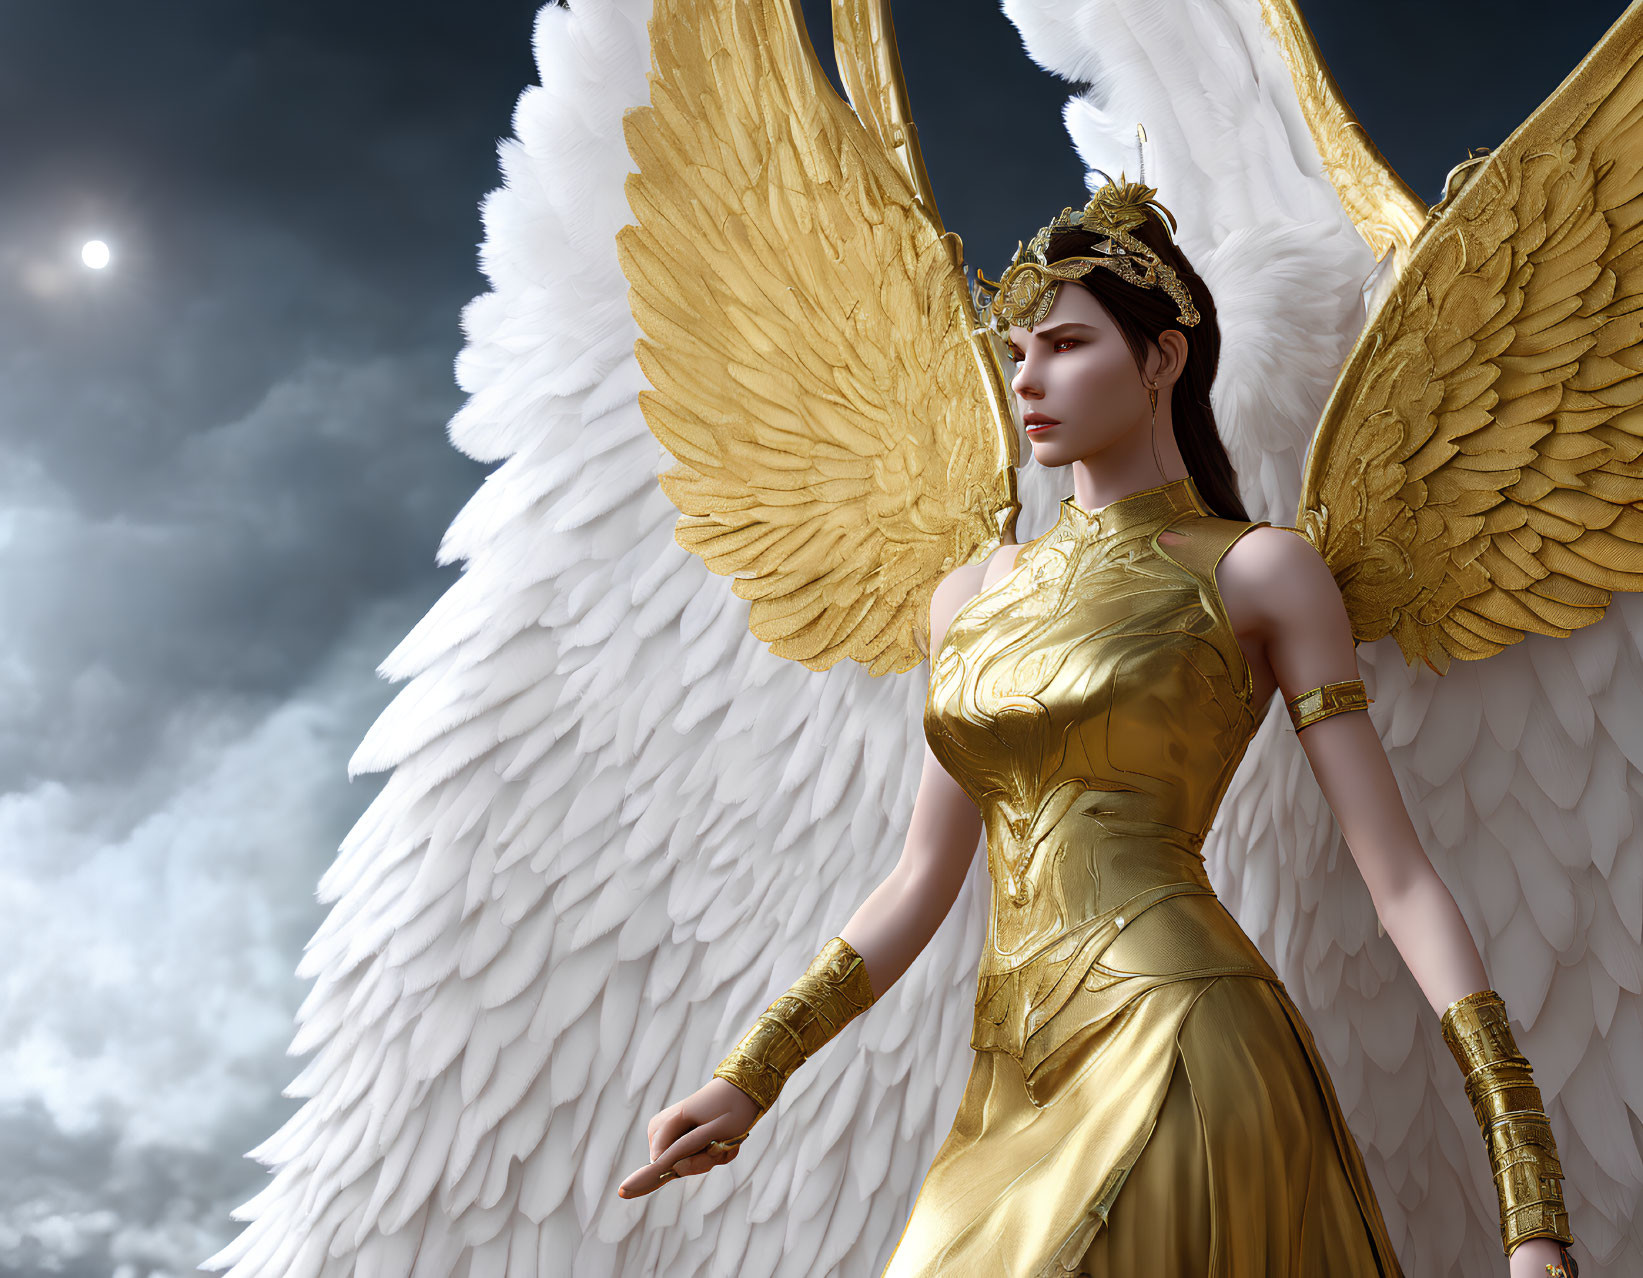 Majestic winged figure in golden armor under dramatic sky